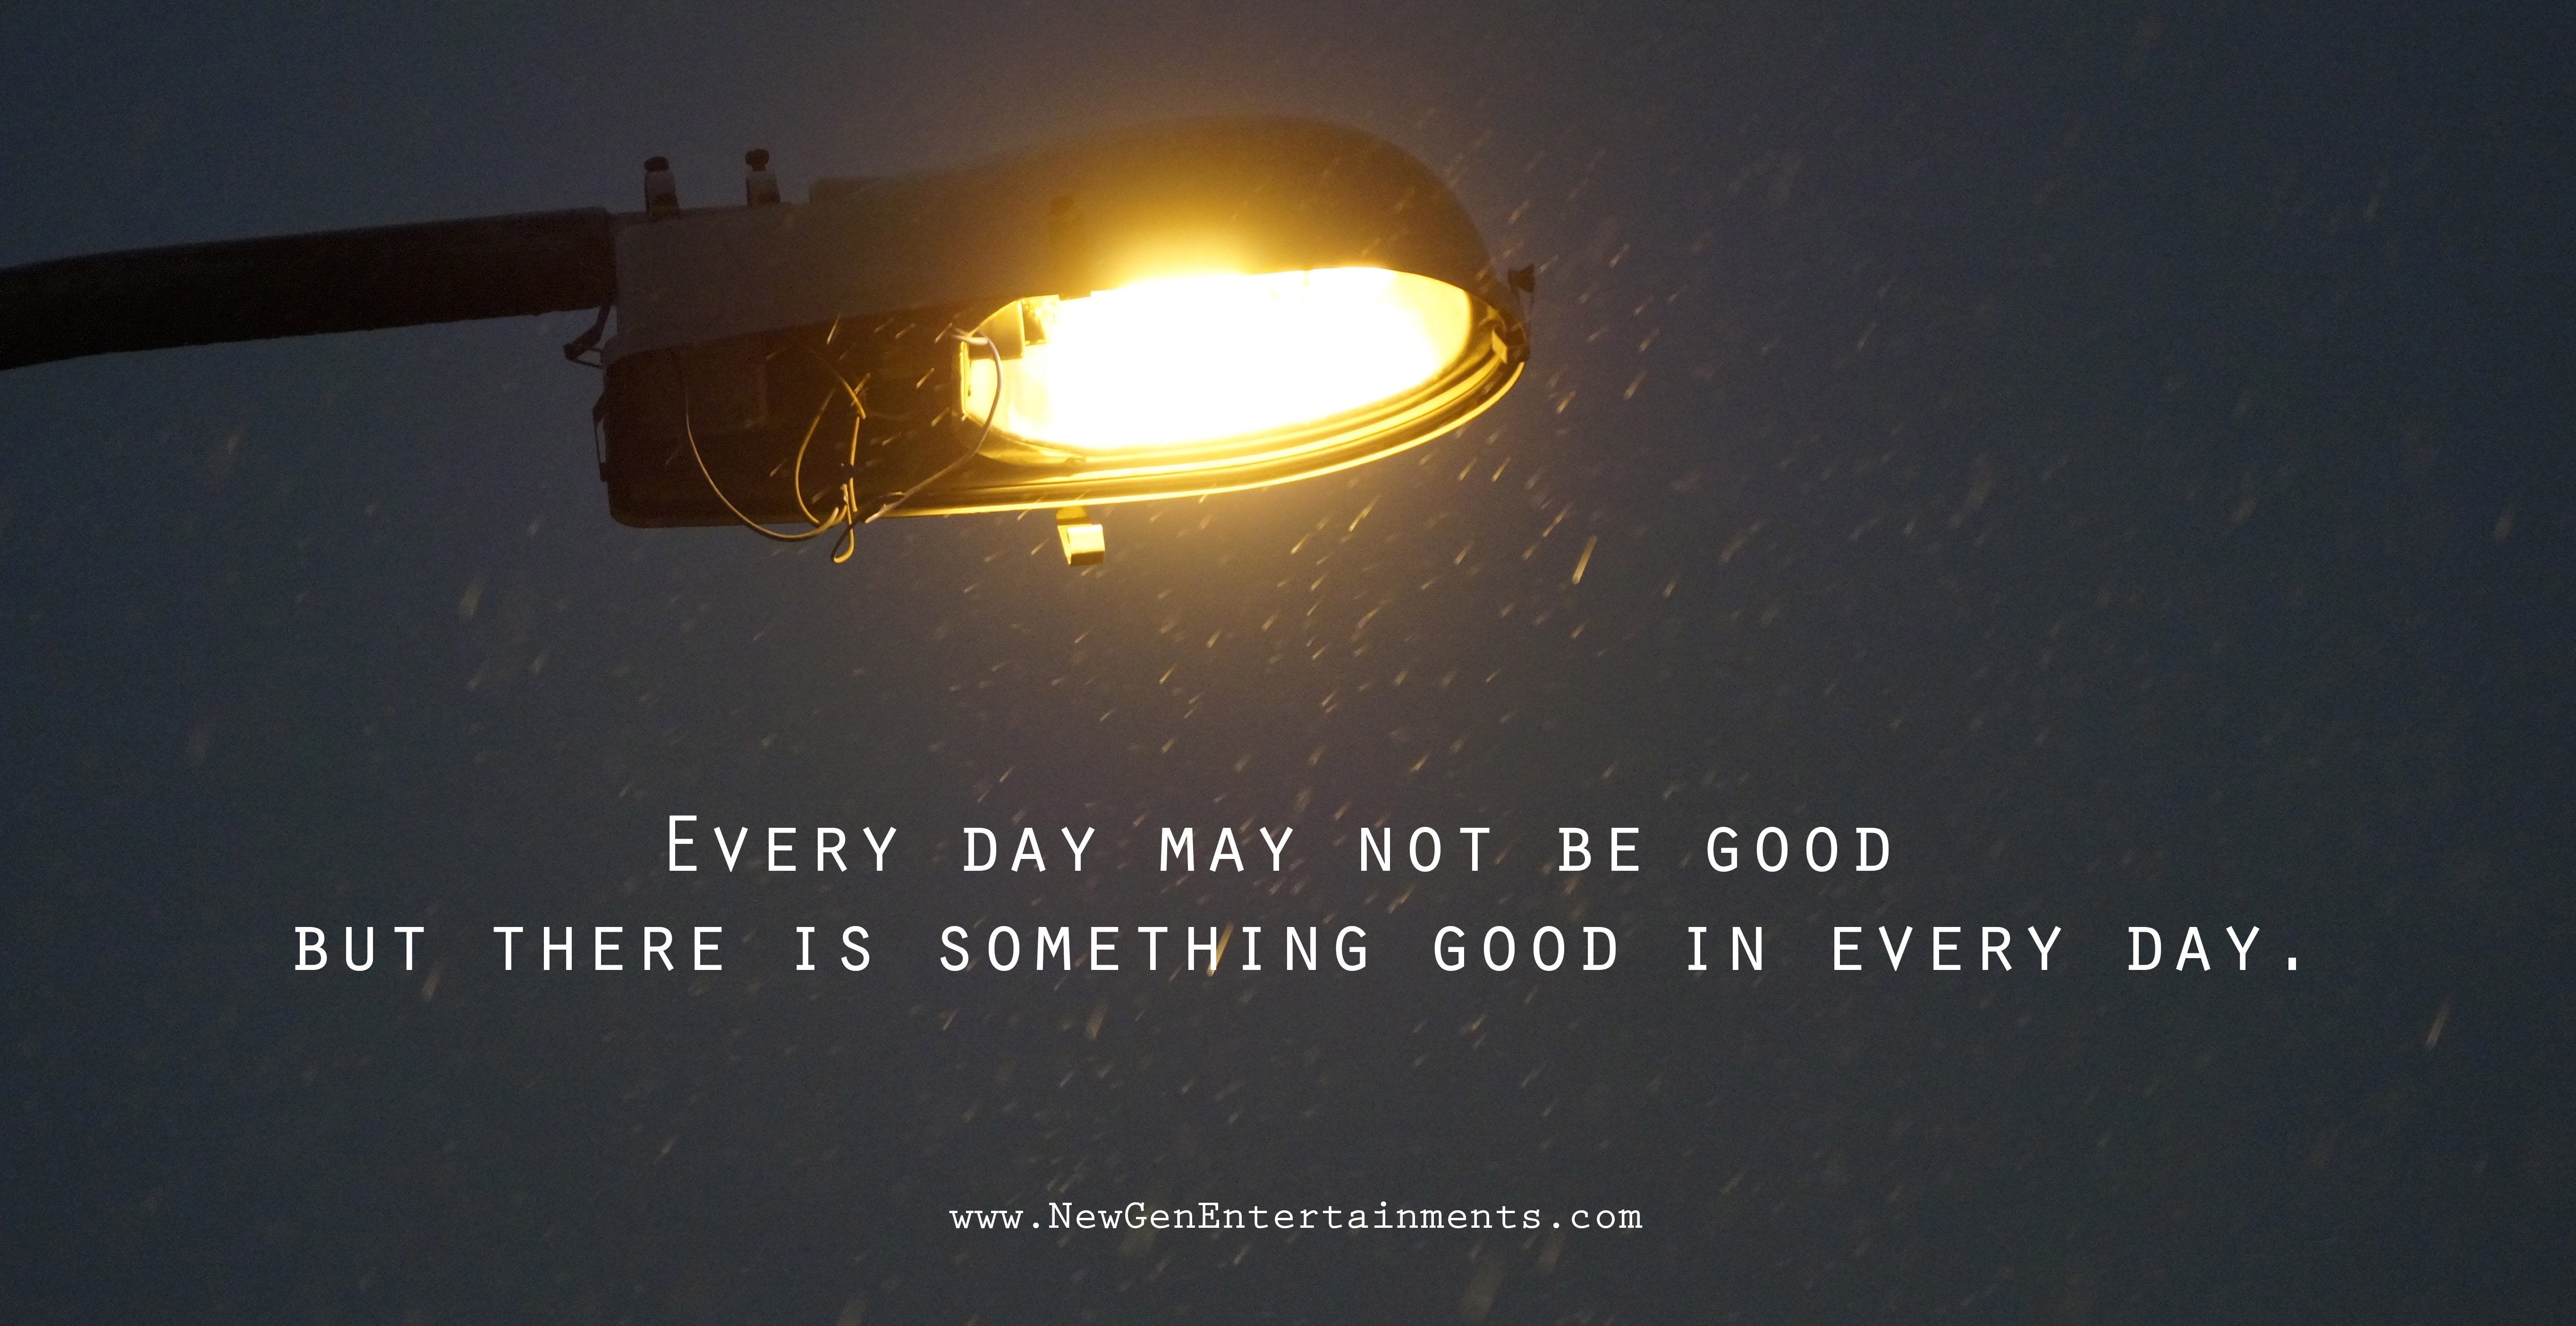 Every day may not be good but there is something good in every day